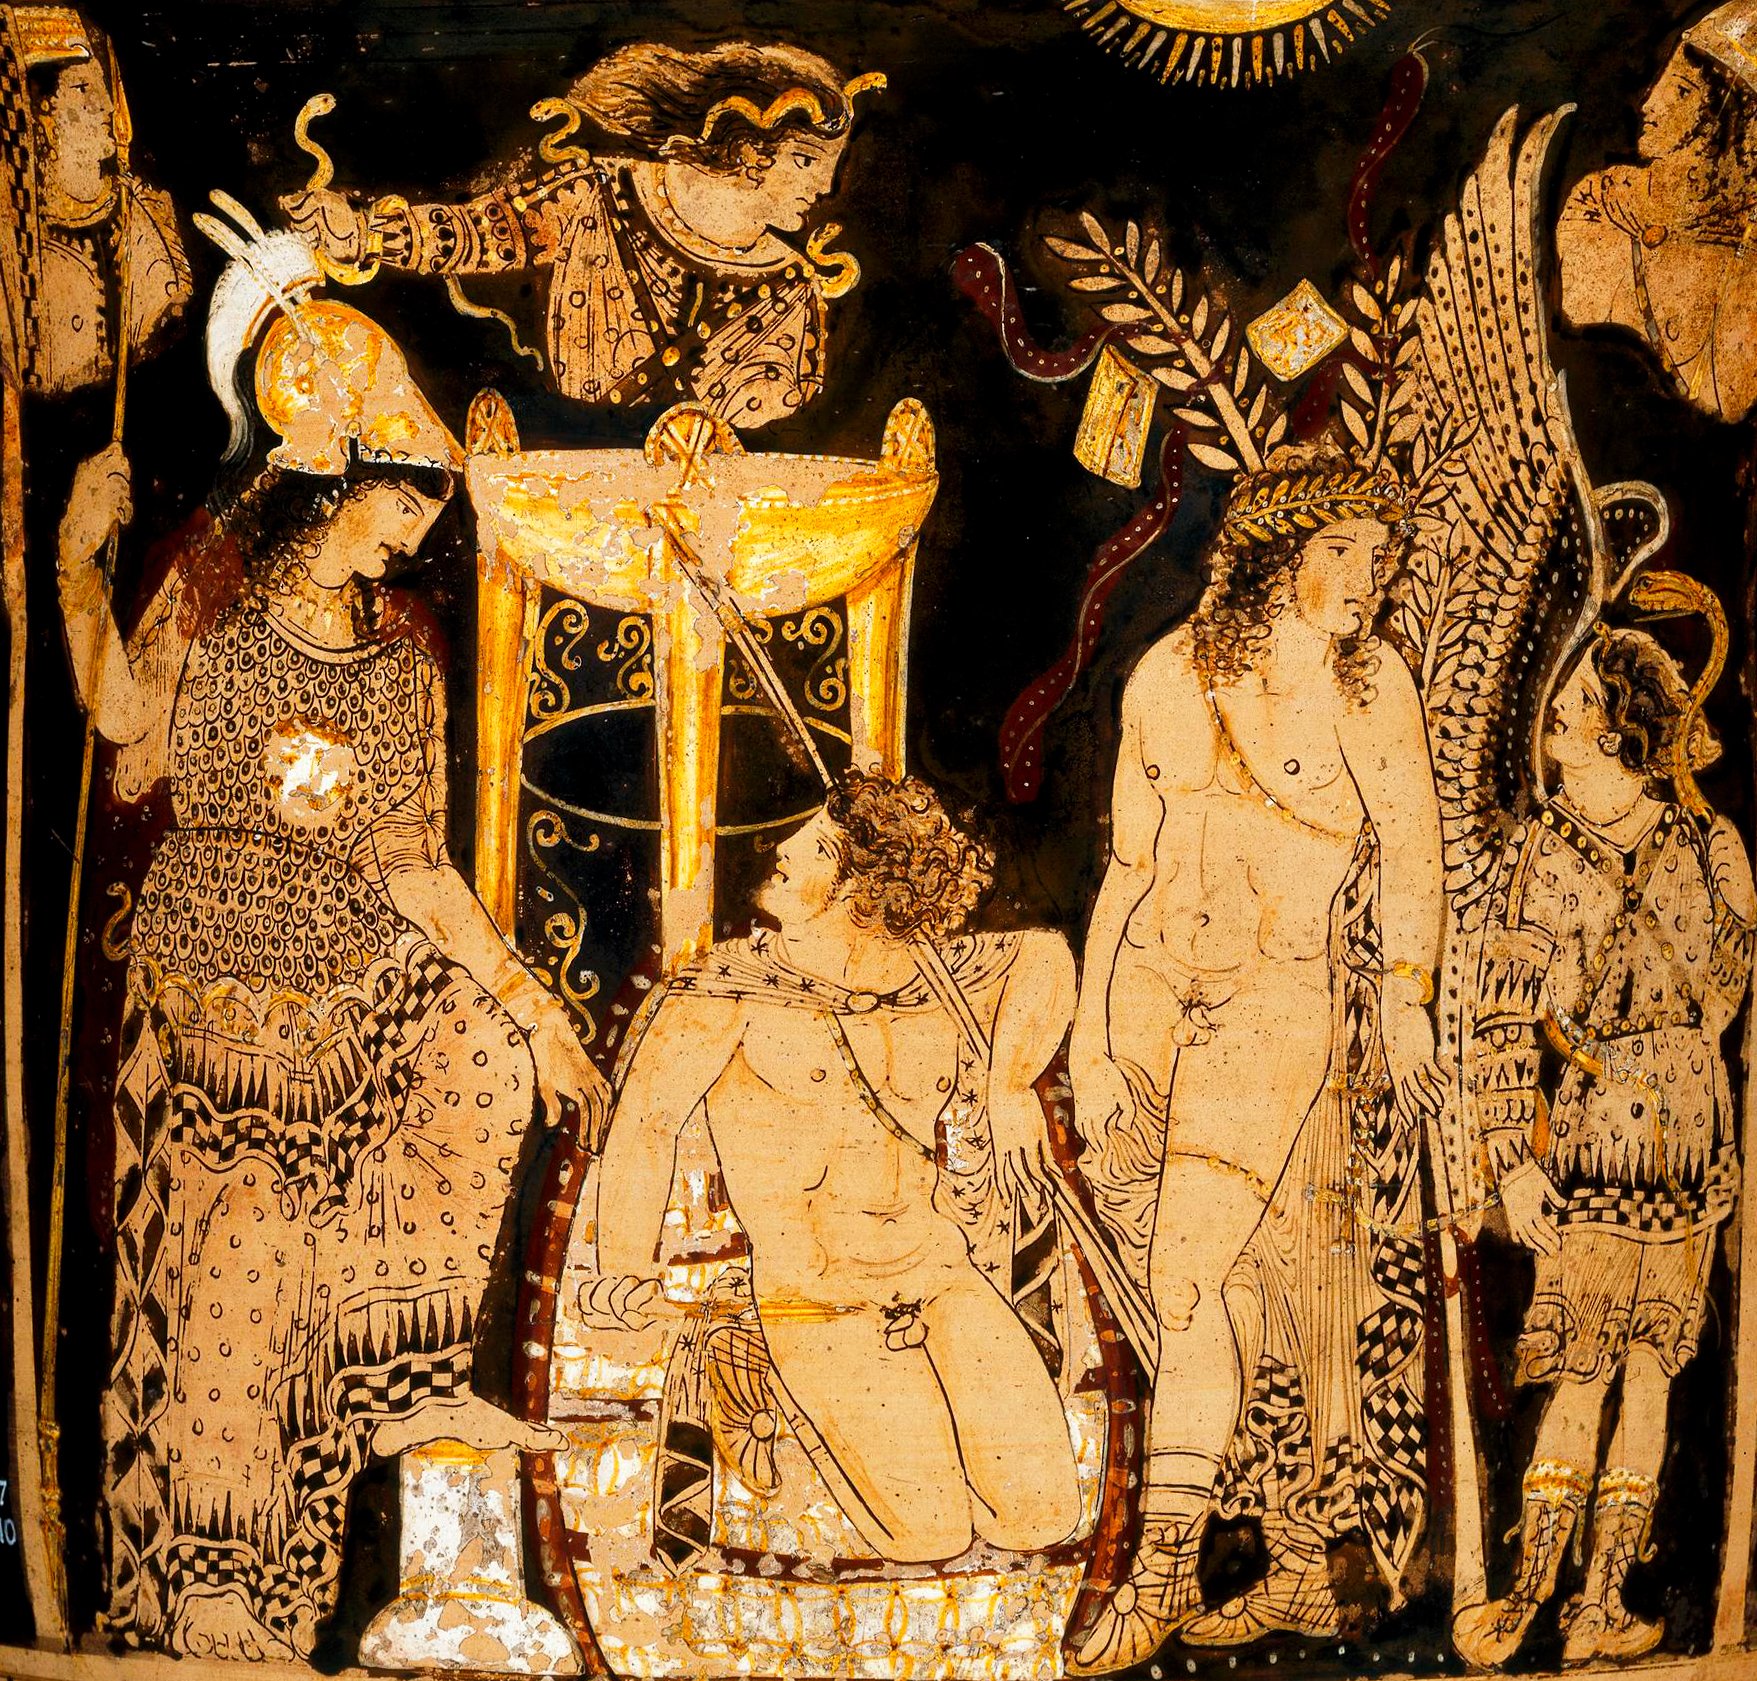 An ancient Greek pottery painting with black and orange colors. The painting shows Orestes consulting the Pythia at Delphi, seeking guidance from Apollo and Athena.